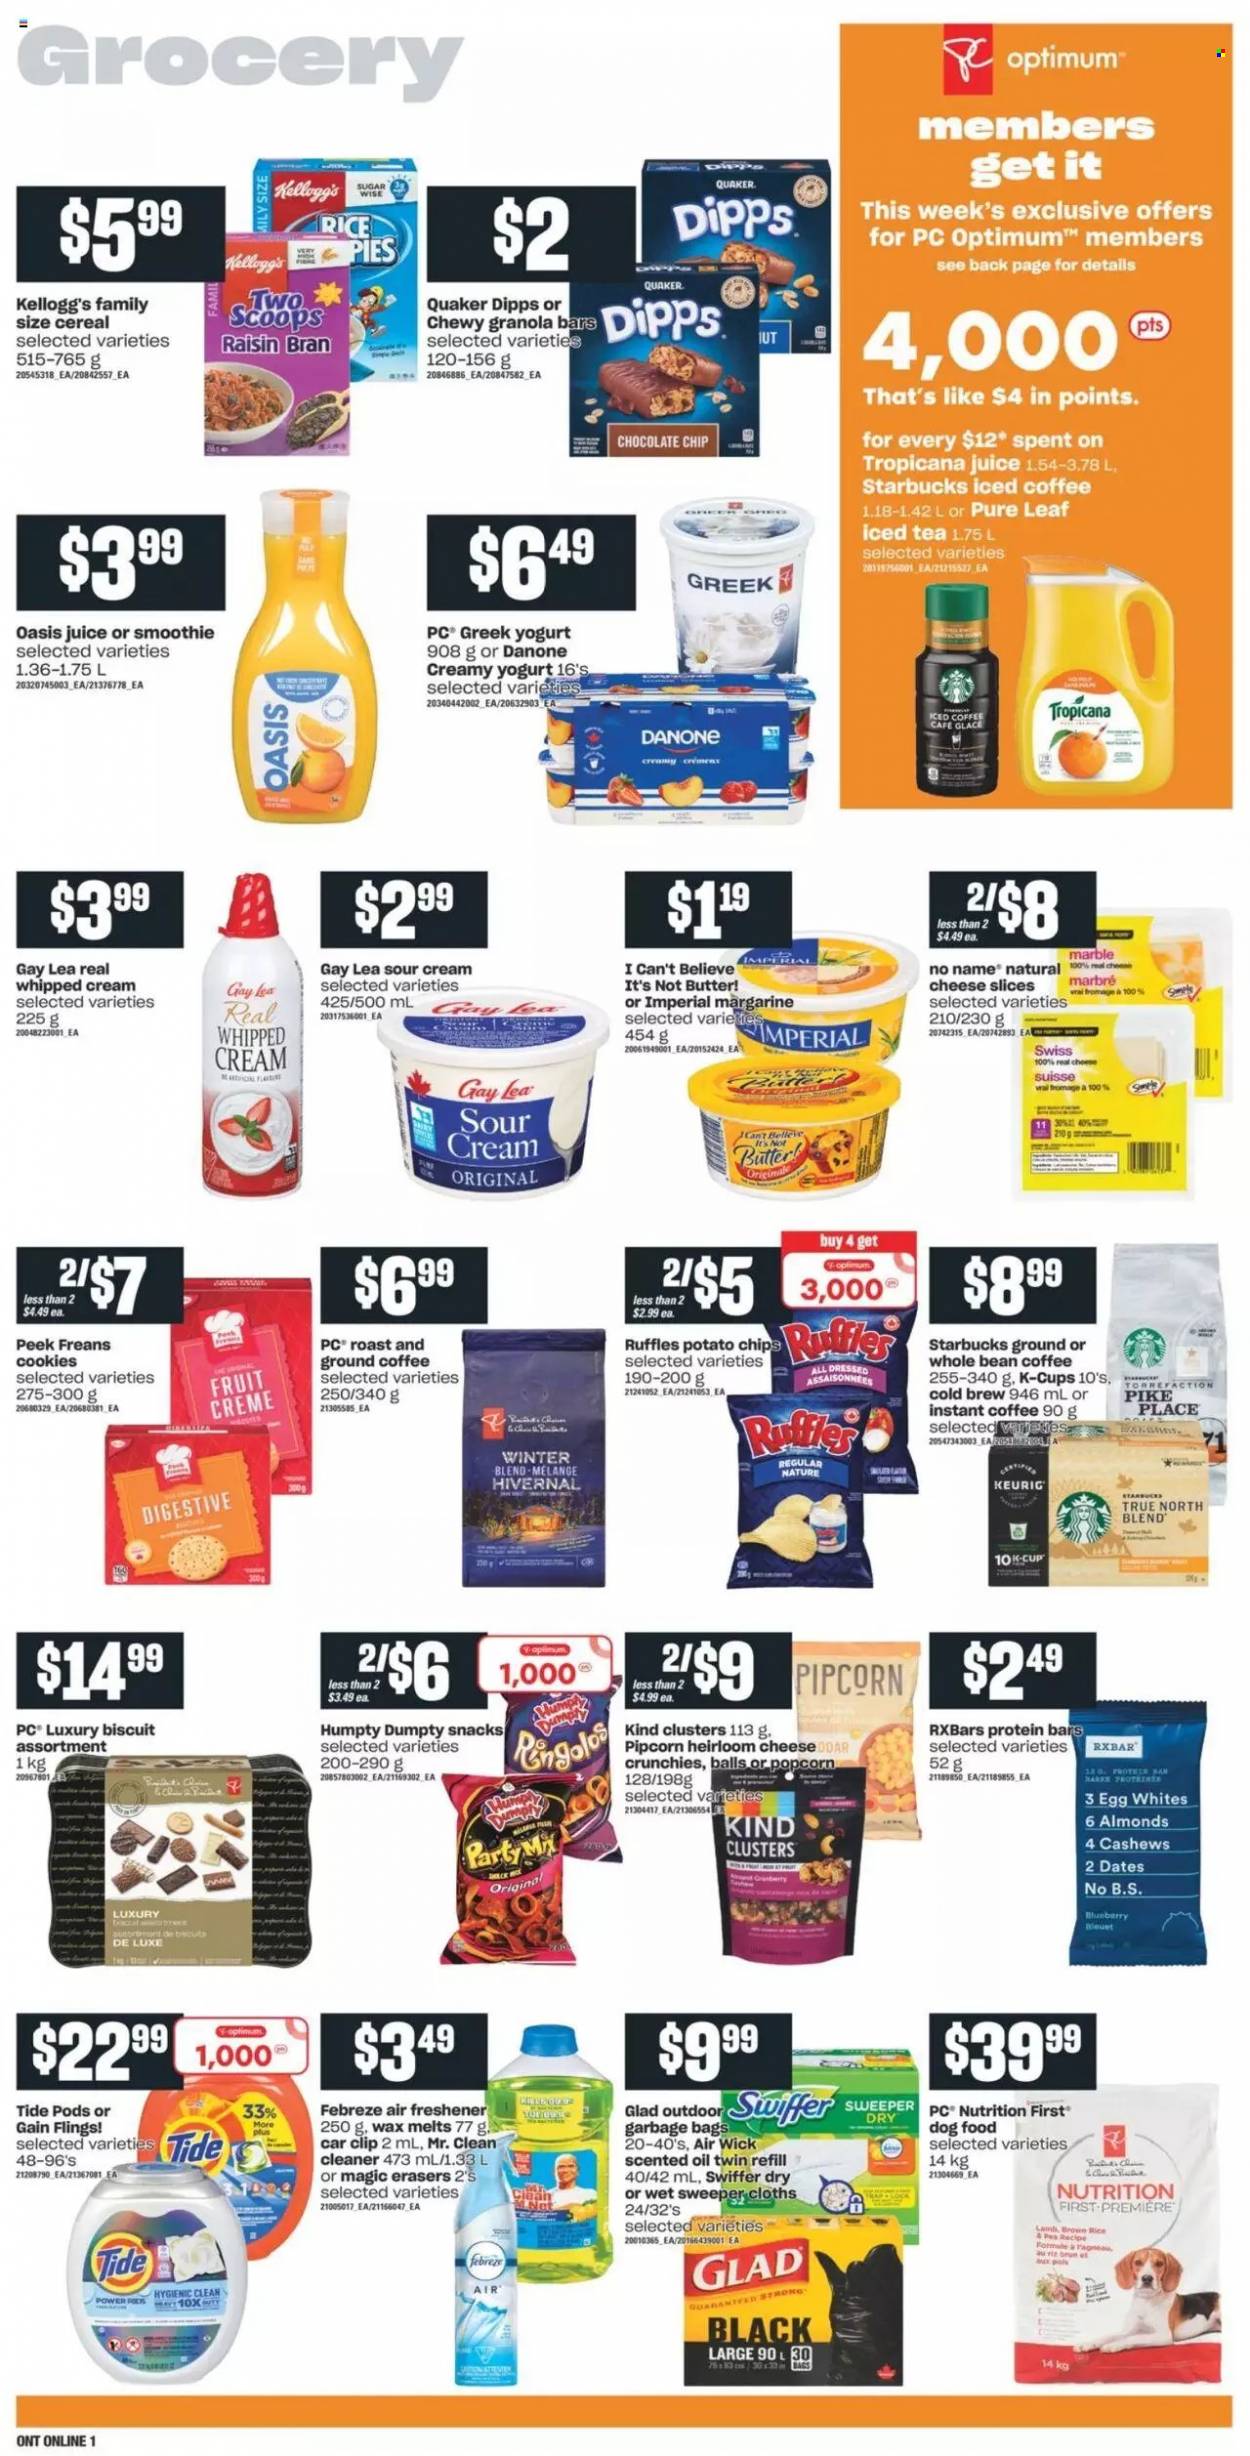 thumbnail - Independent Flyer - November 25, 2021 - December 01, 2021 - Sales products - No Name, Quaker, sliced cheese, cheese, greek yoghurt, yoghurt, eggs, butter, margarine, I Can't Believe It's Not Butter, sour cream, whipped cream, cookies, snack, Kellogg's, biscuit, Digestive, potato chips, popcorn, Ruffles, sugar, cereals, protein bar, granola bar, Raisin Bran, rice, oil, juice, ice tea, smoothie, iced coffee, Pure Leaf, instant coffee, ground coffee, coffee capsules, Starbucks, K-Cups, Keurig, Febreze, Gain, cleaner, Swiffer, Tide, bag, air freshener, Air Wick, scented oil, PREMIERE, animal food, dog food, Optimum, Danone, chips. Page 4.